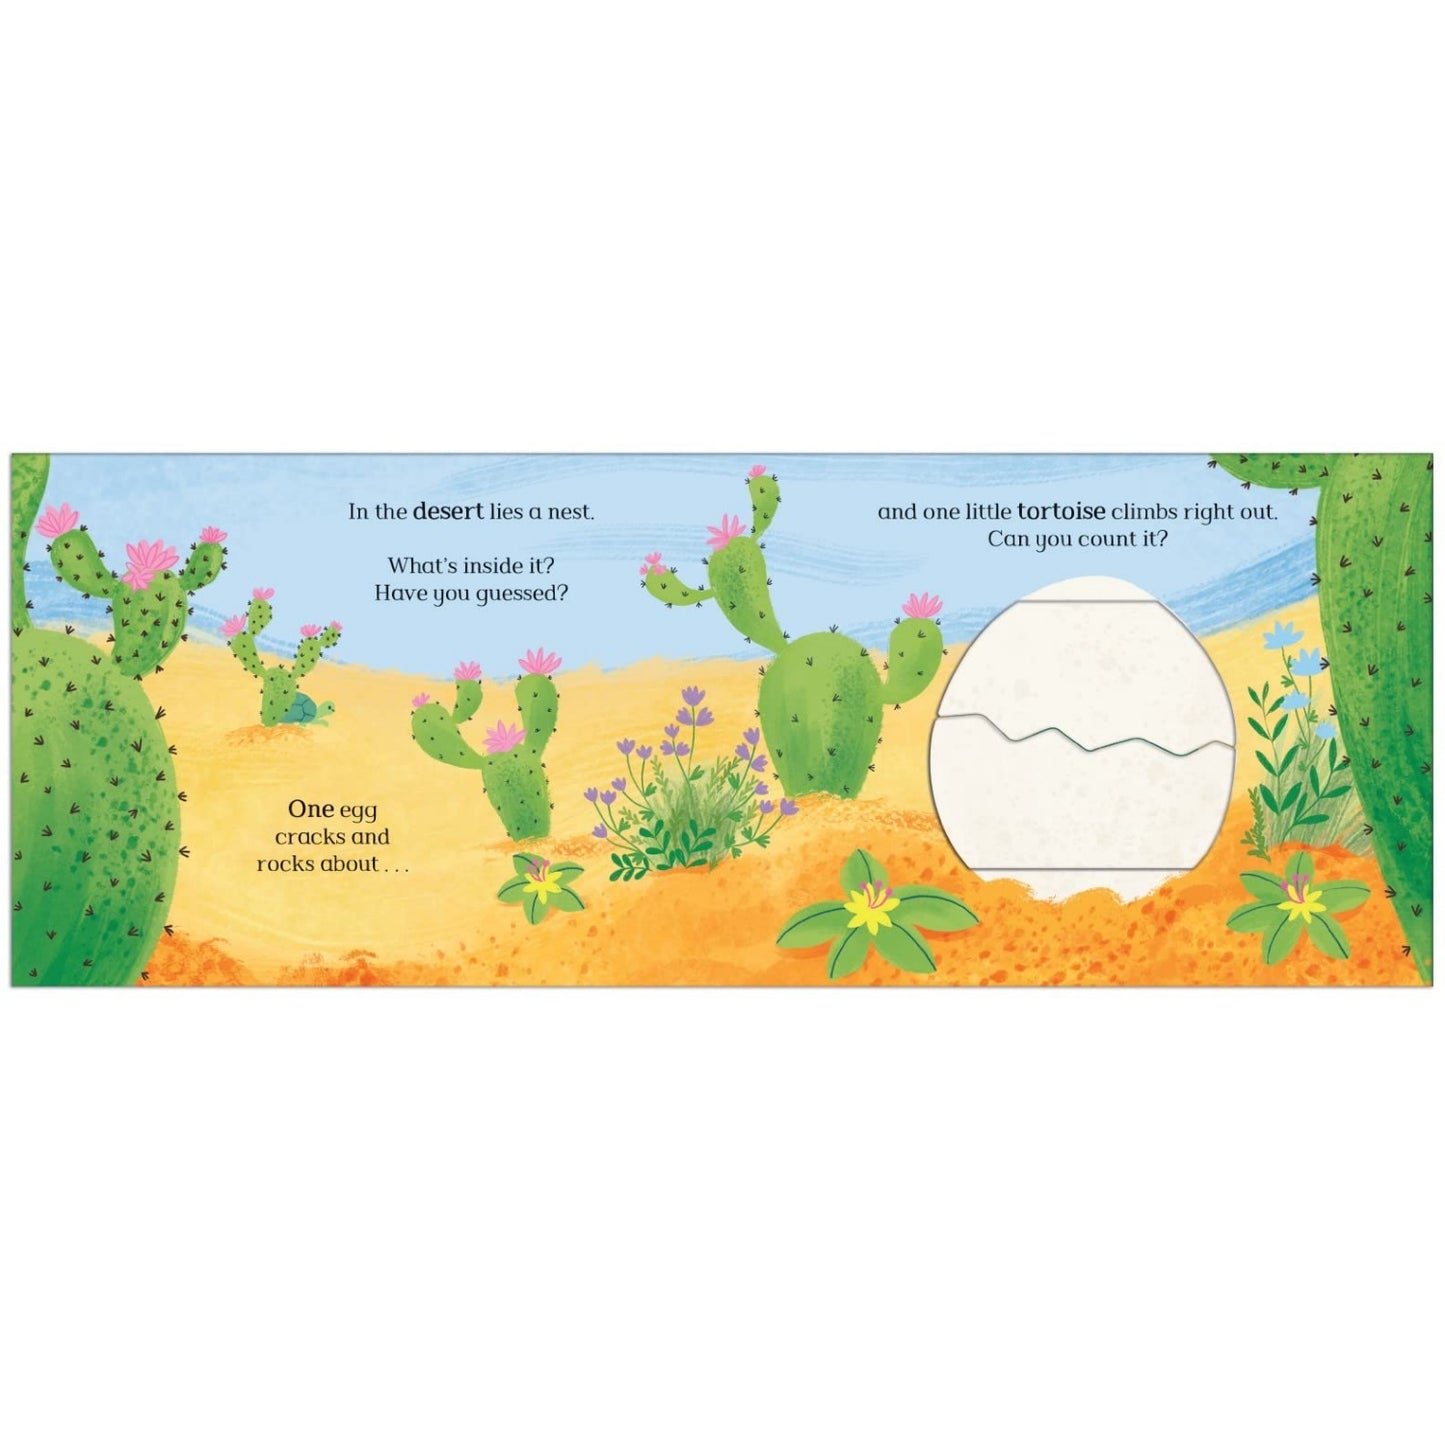 Eggs! - A Lift-the-Flap Counting Book Full of Surprises! | Interactive Board Book for Toddlers